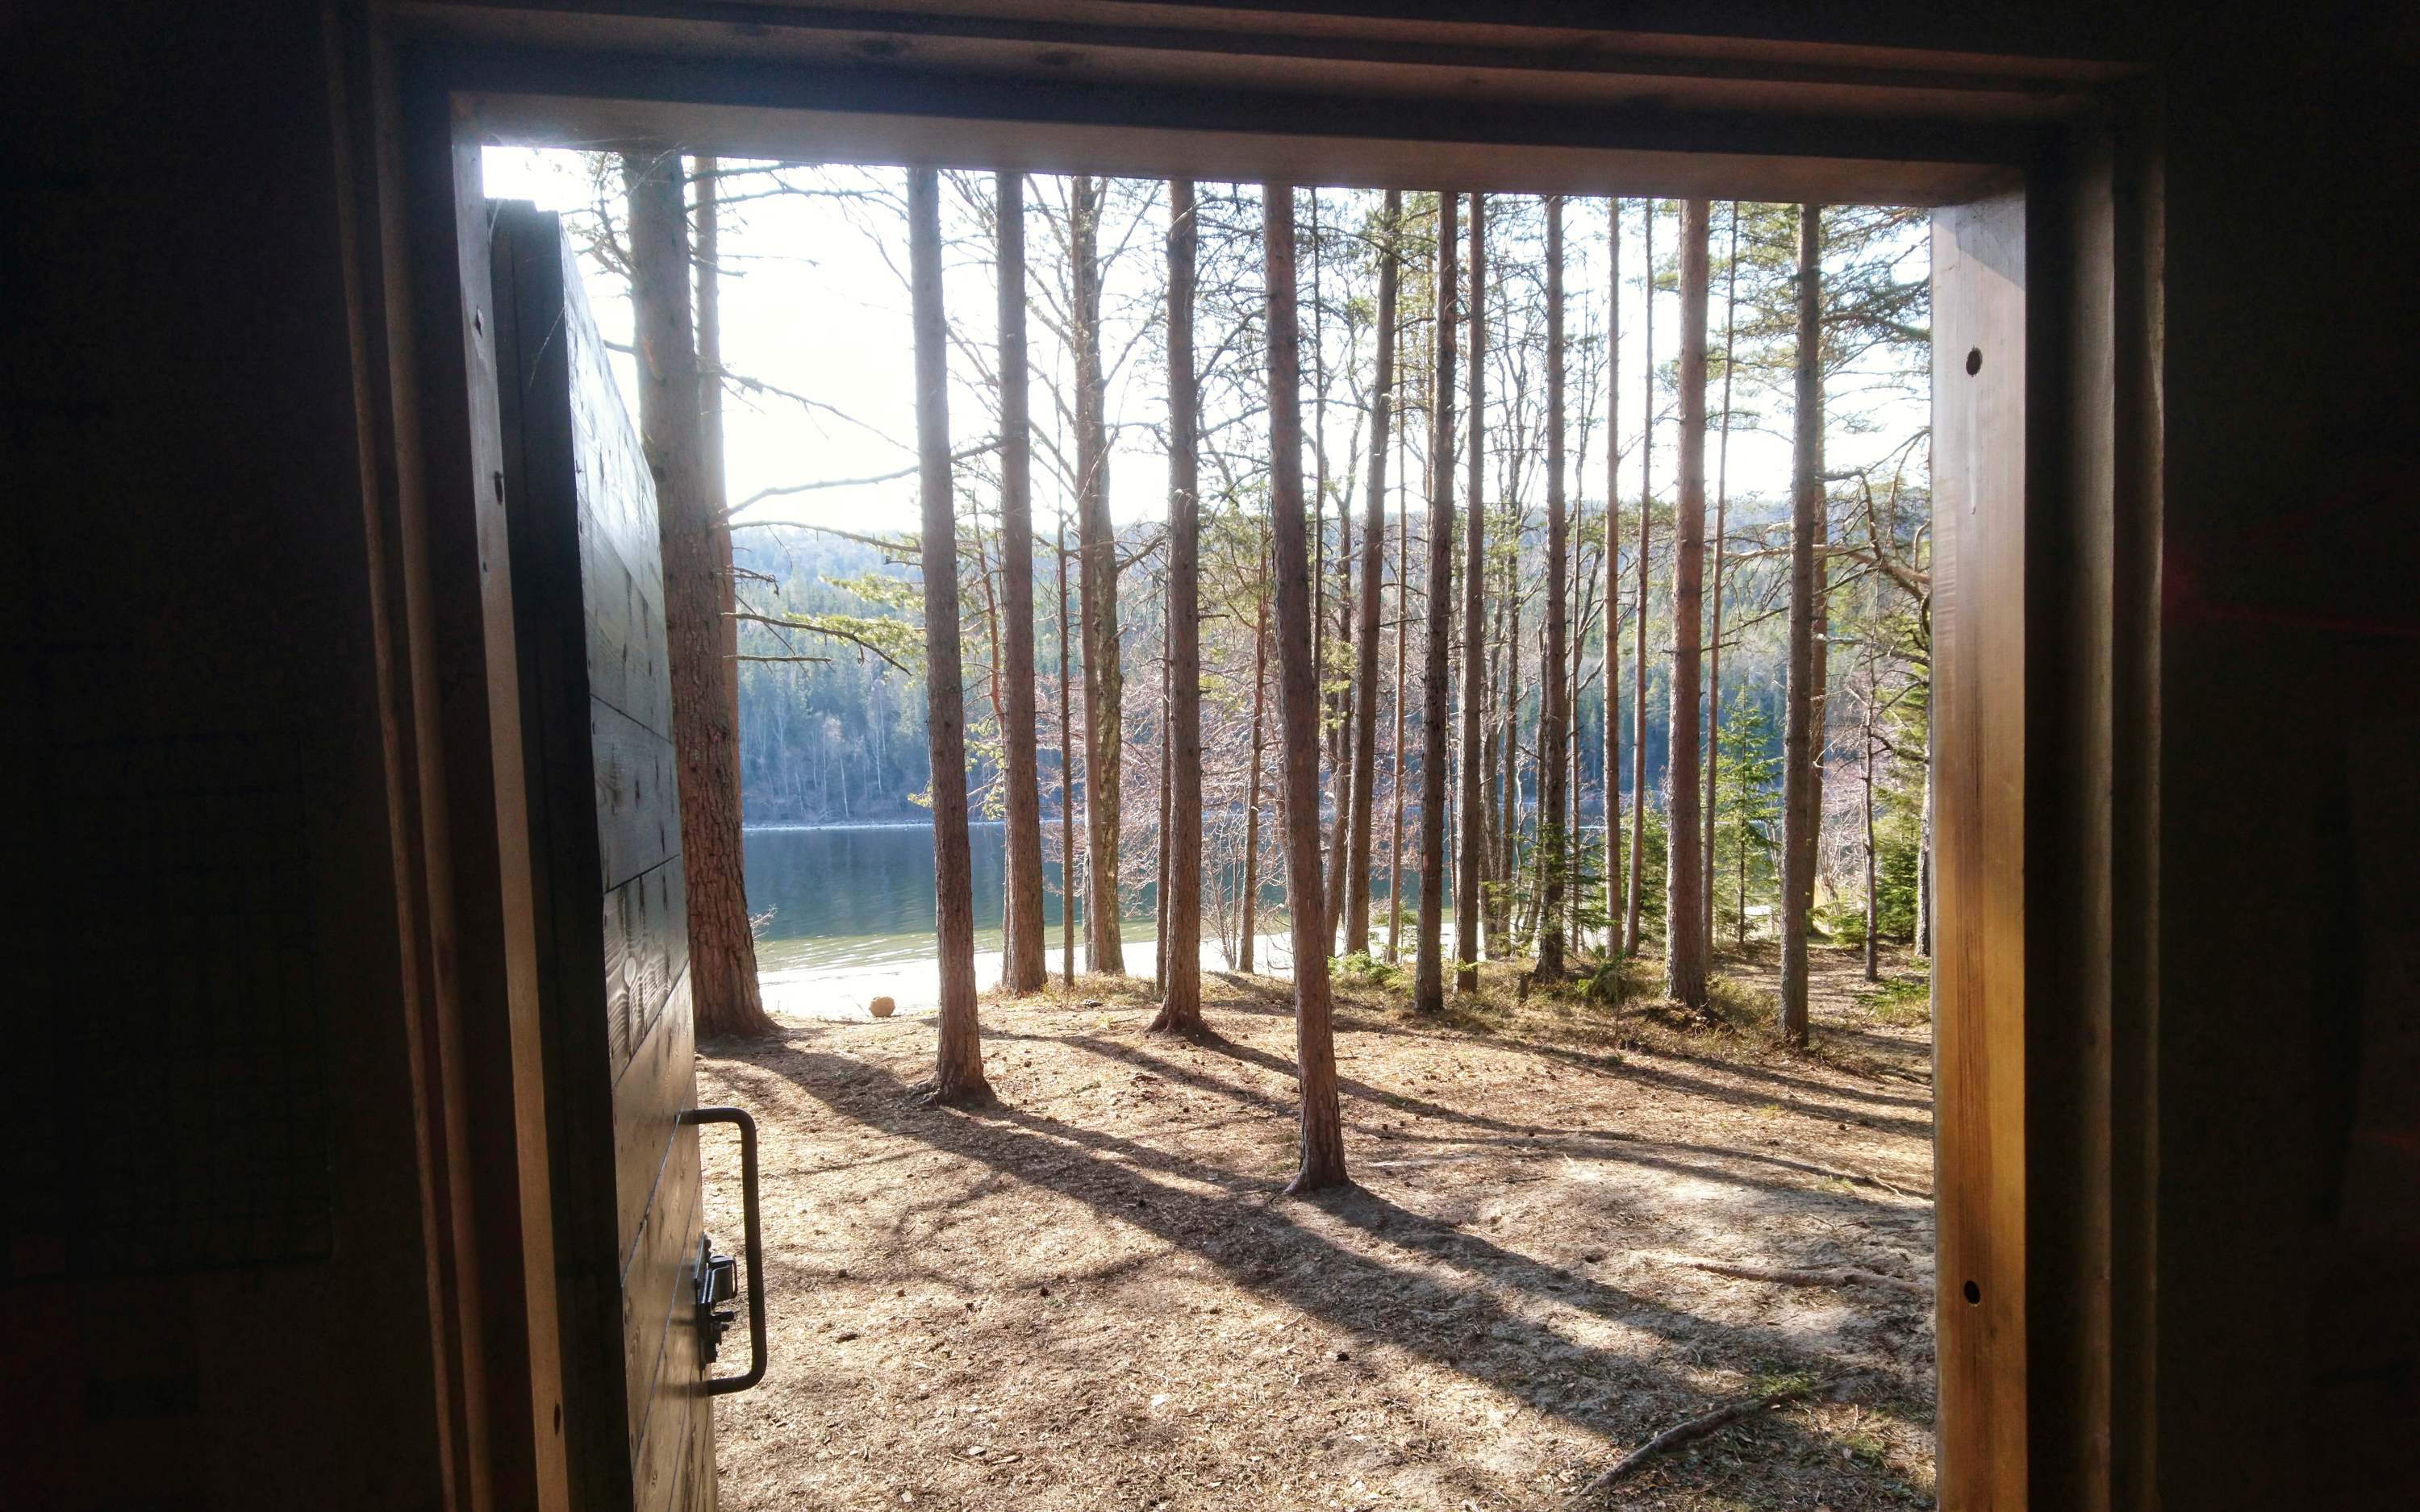 View from the door of a cabin showing trees and water.